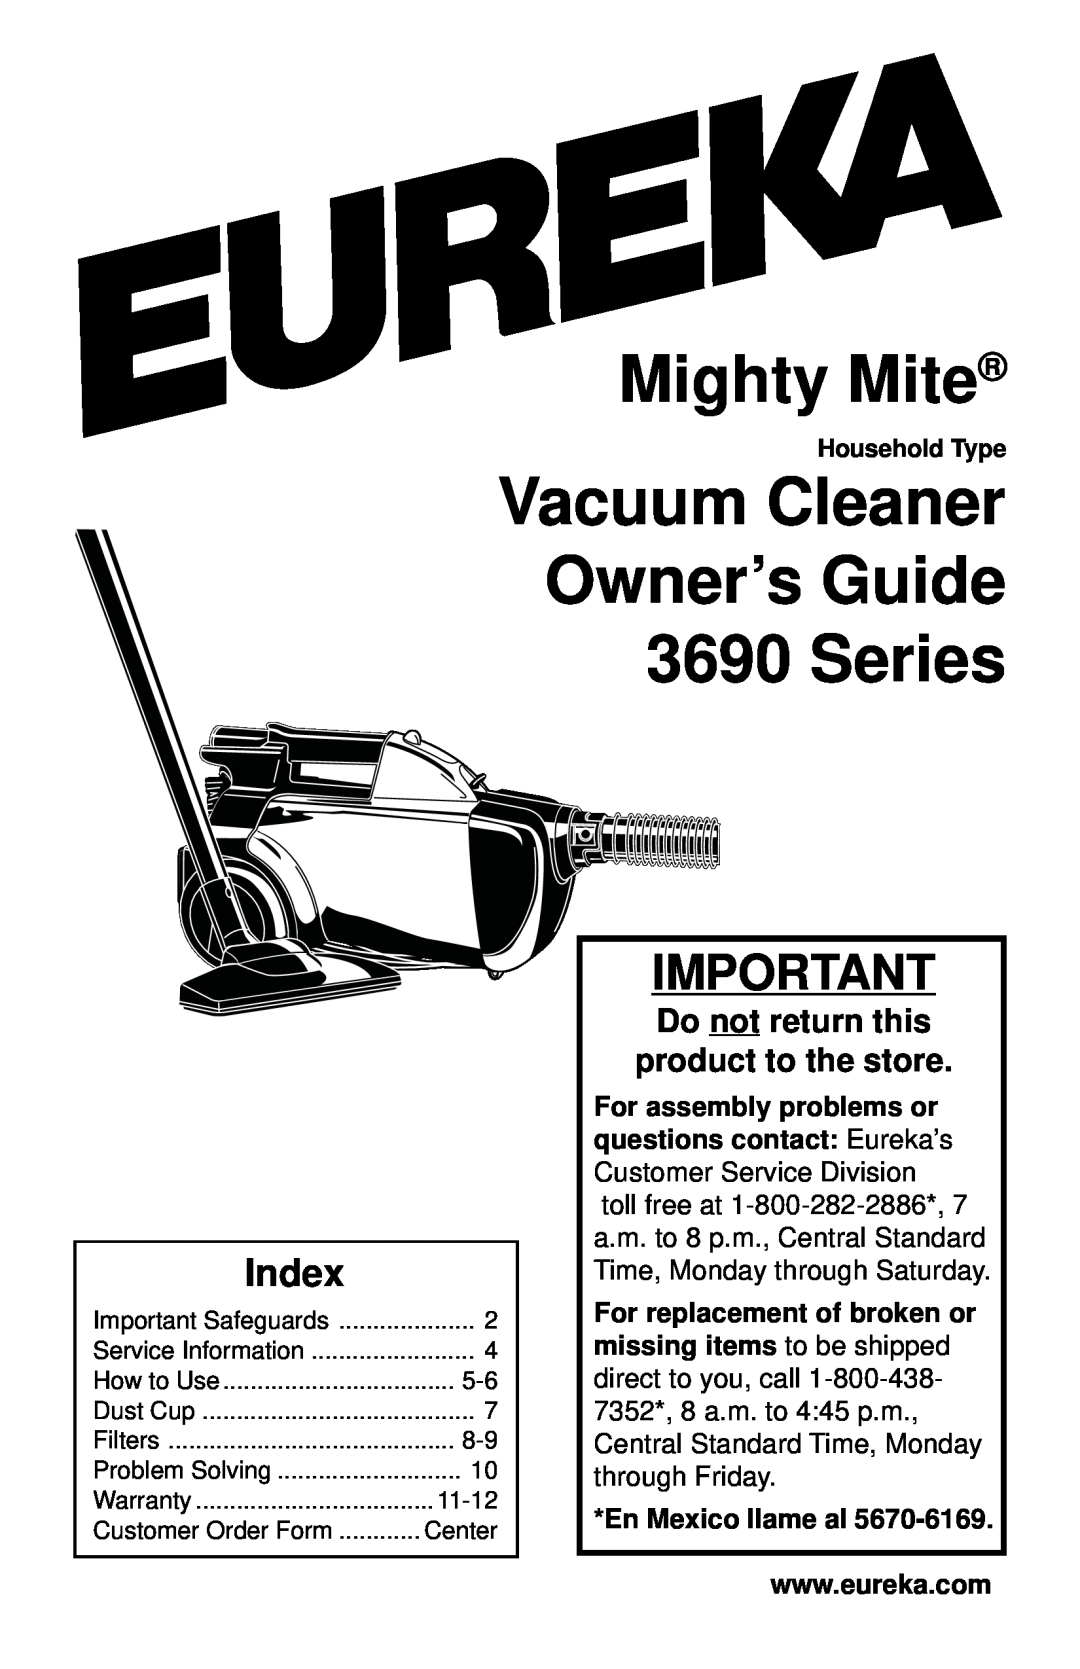 Eureka warranty Do not return this product to the store, Mighty Mite, Vacuum Cleaner Owner’s Guide 3690 Series, Index 